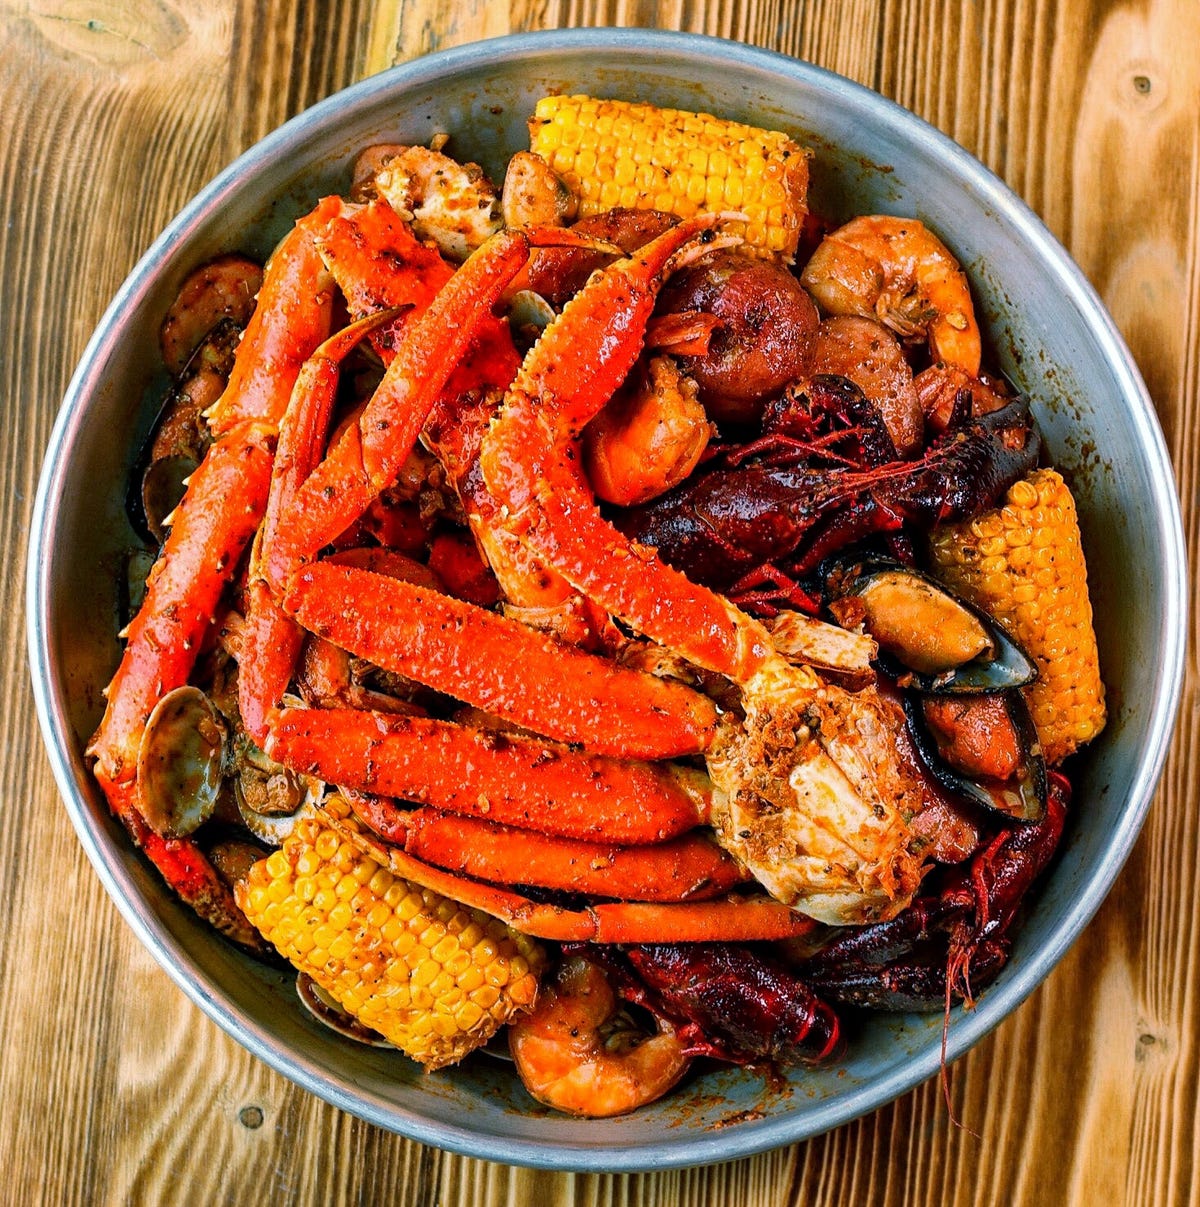 Seafood boils near me: Where to get Cajun dishes in NJ